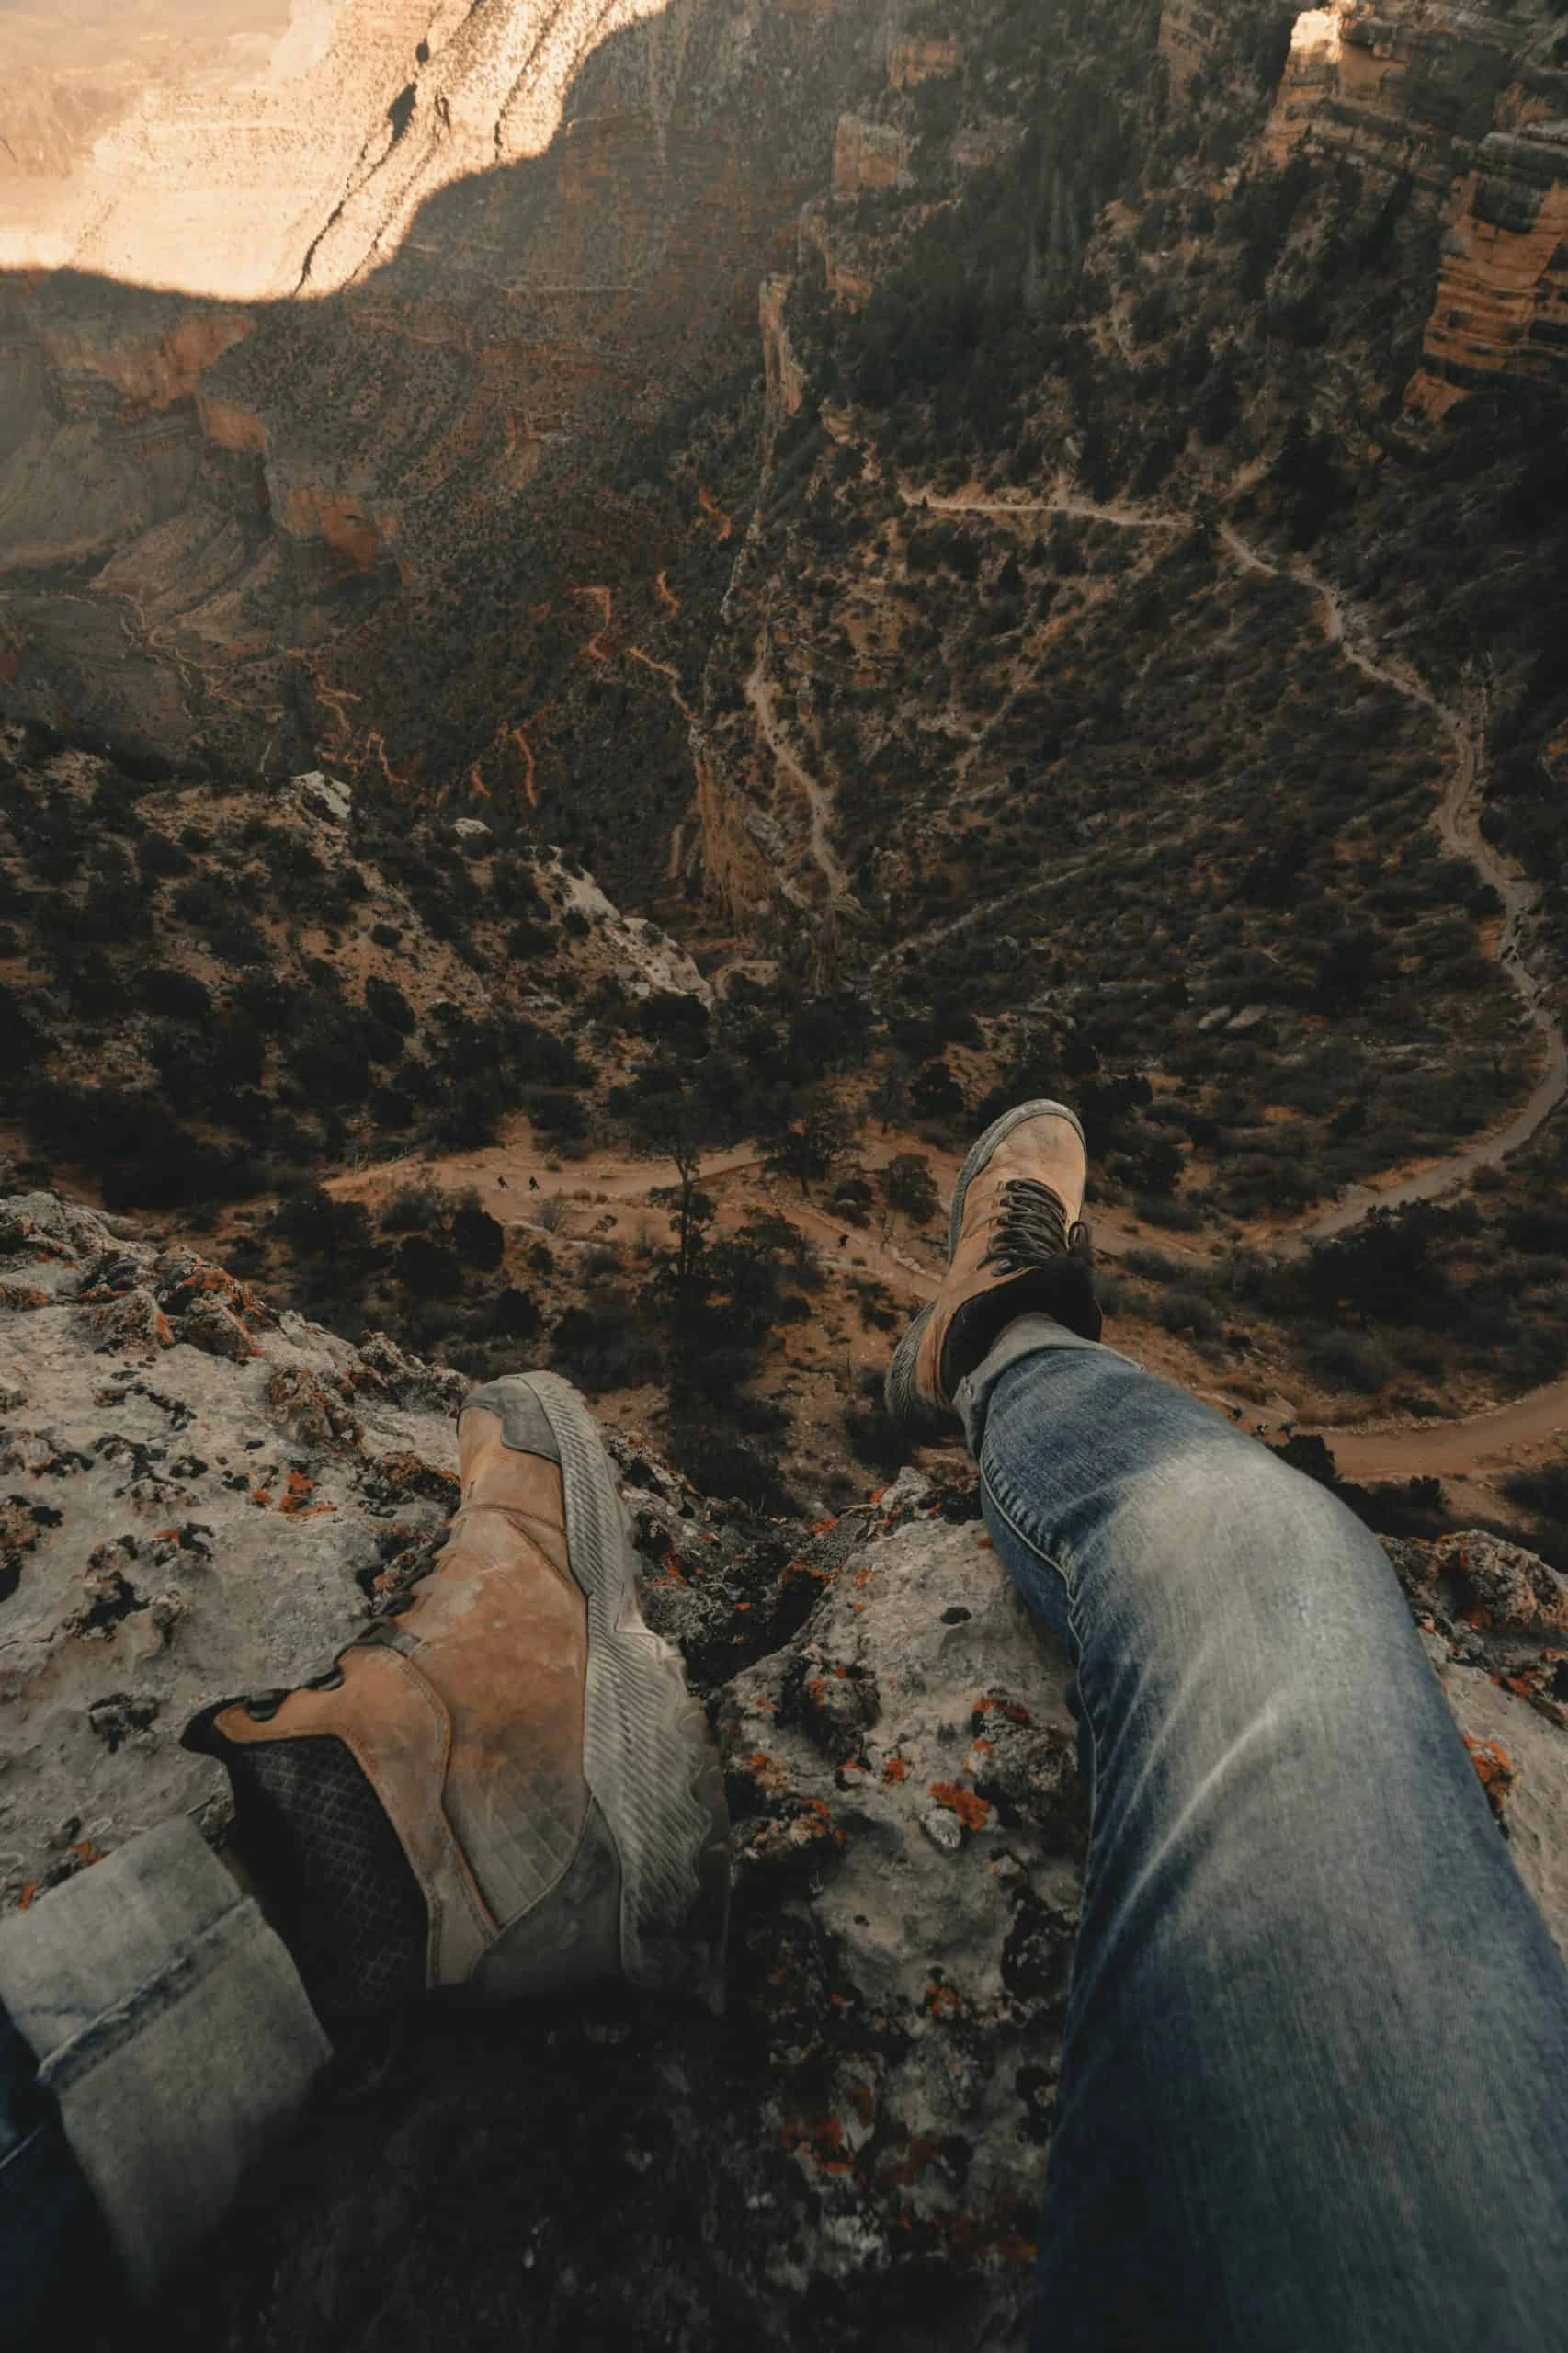 clay-banks-GyCMerrell HHiking boots worn by man sitting on edge of cliff overlooking valley below-unsplash-scaled